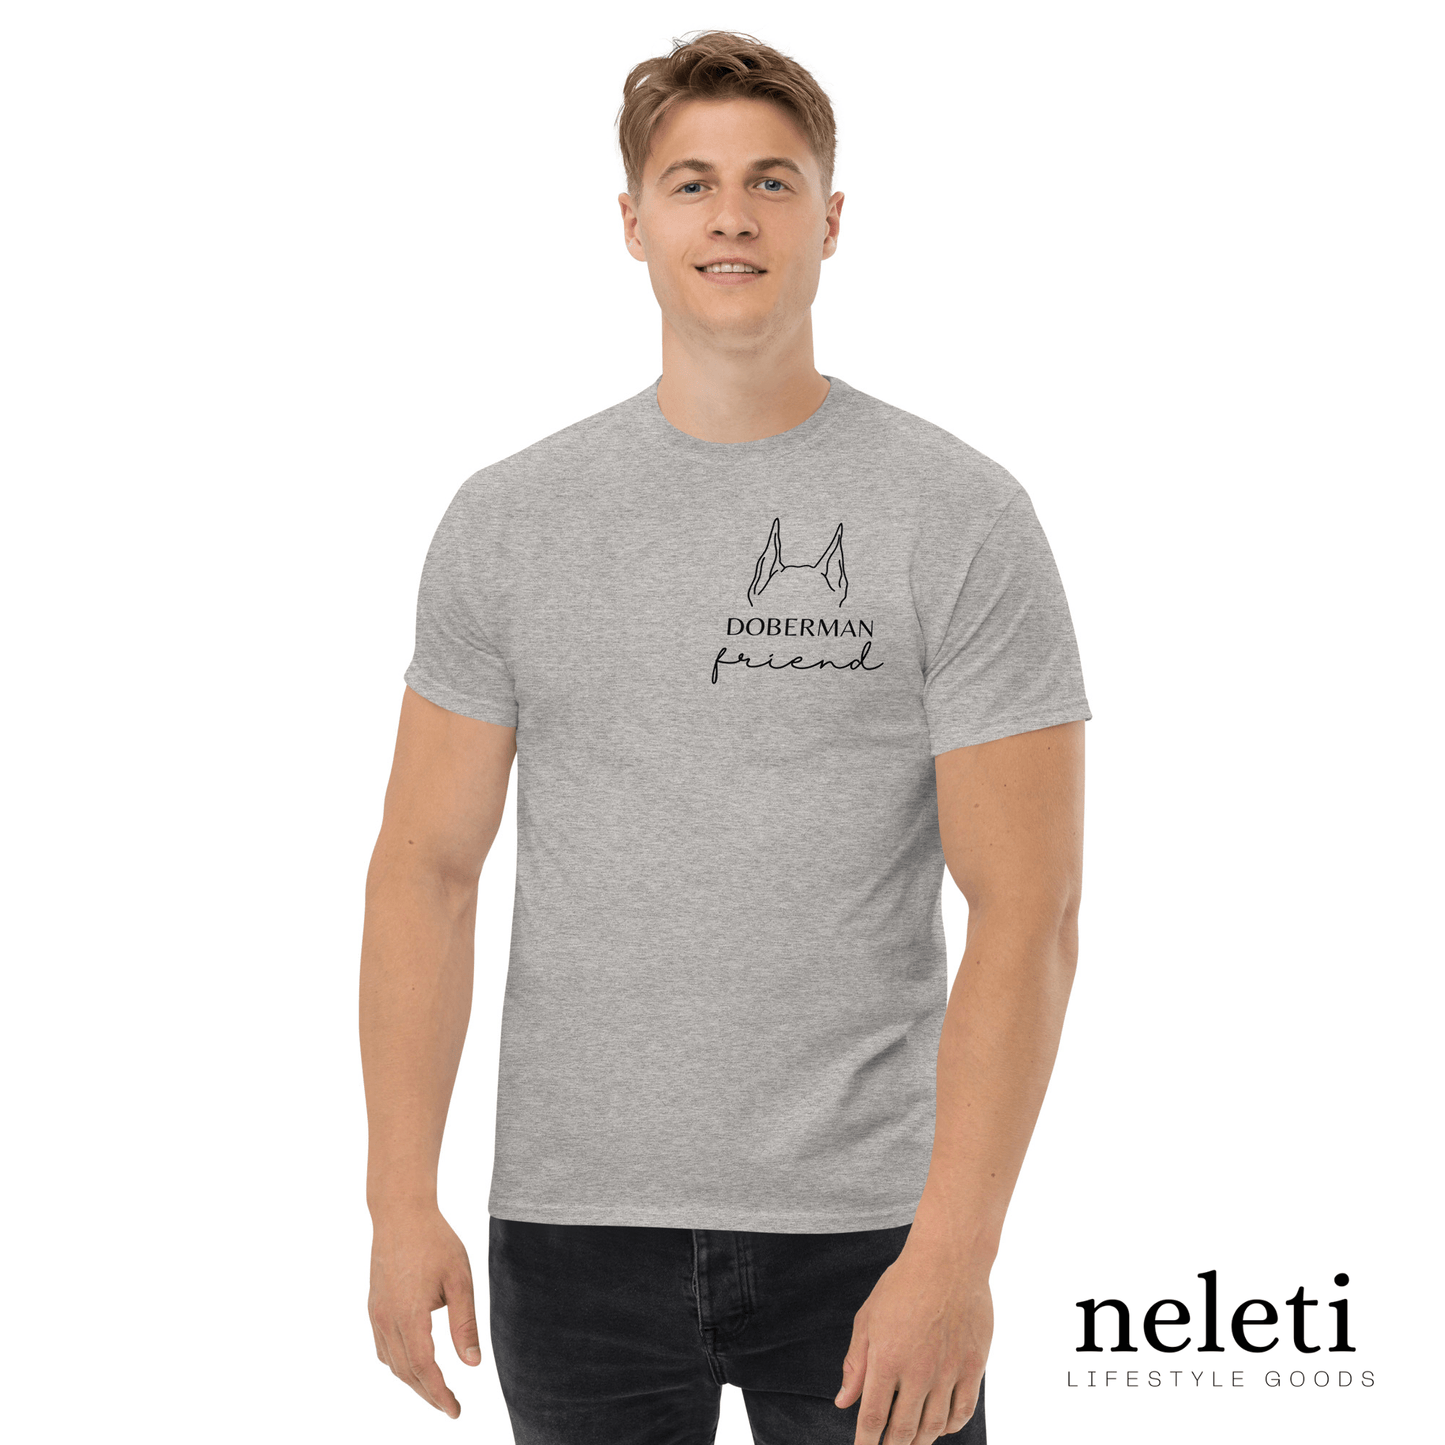 Men's Classic Tee with Personalized Dog Ears